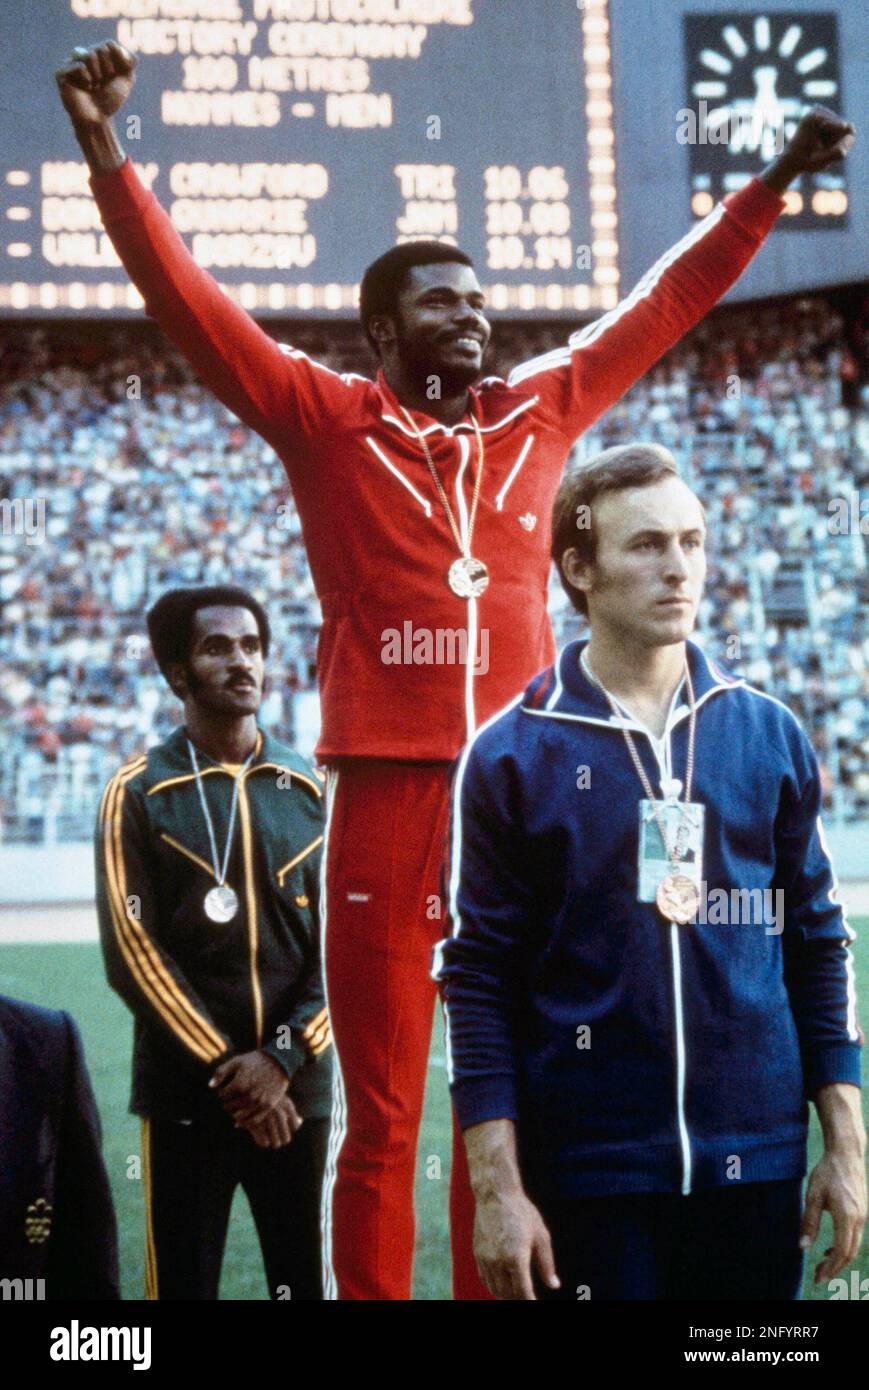 Front to back: Valerij Borzov, USSR, bronze medal; Hasely crawford, arms  upraised, Trinidad, gold medal and